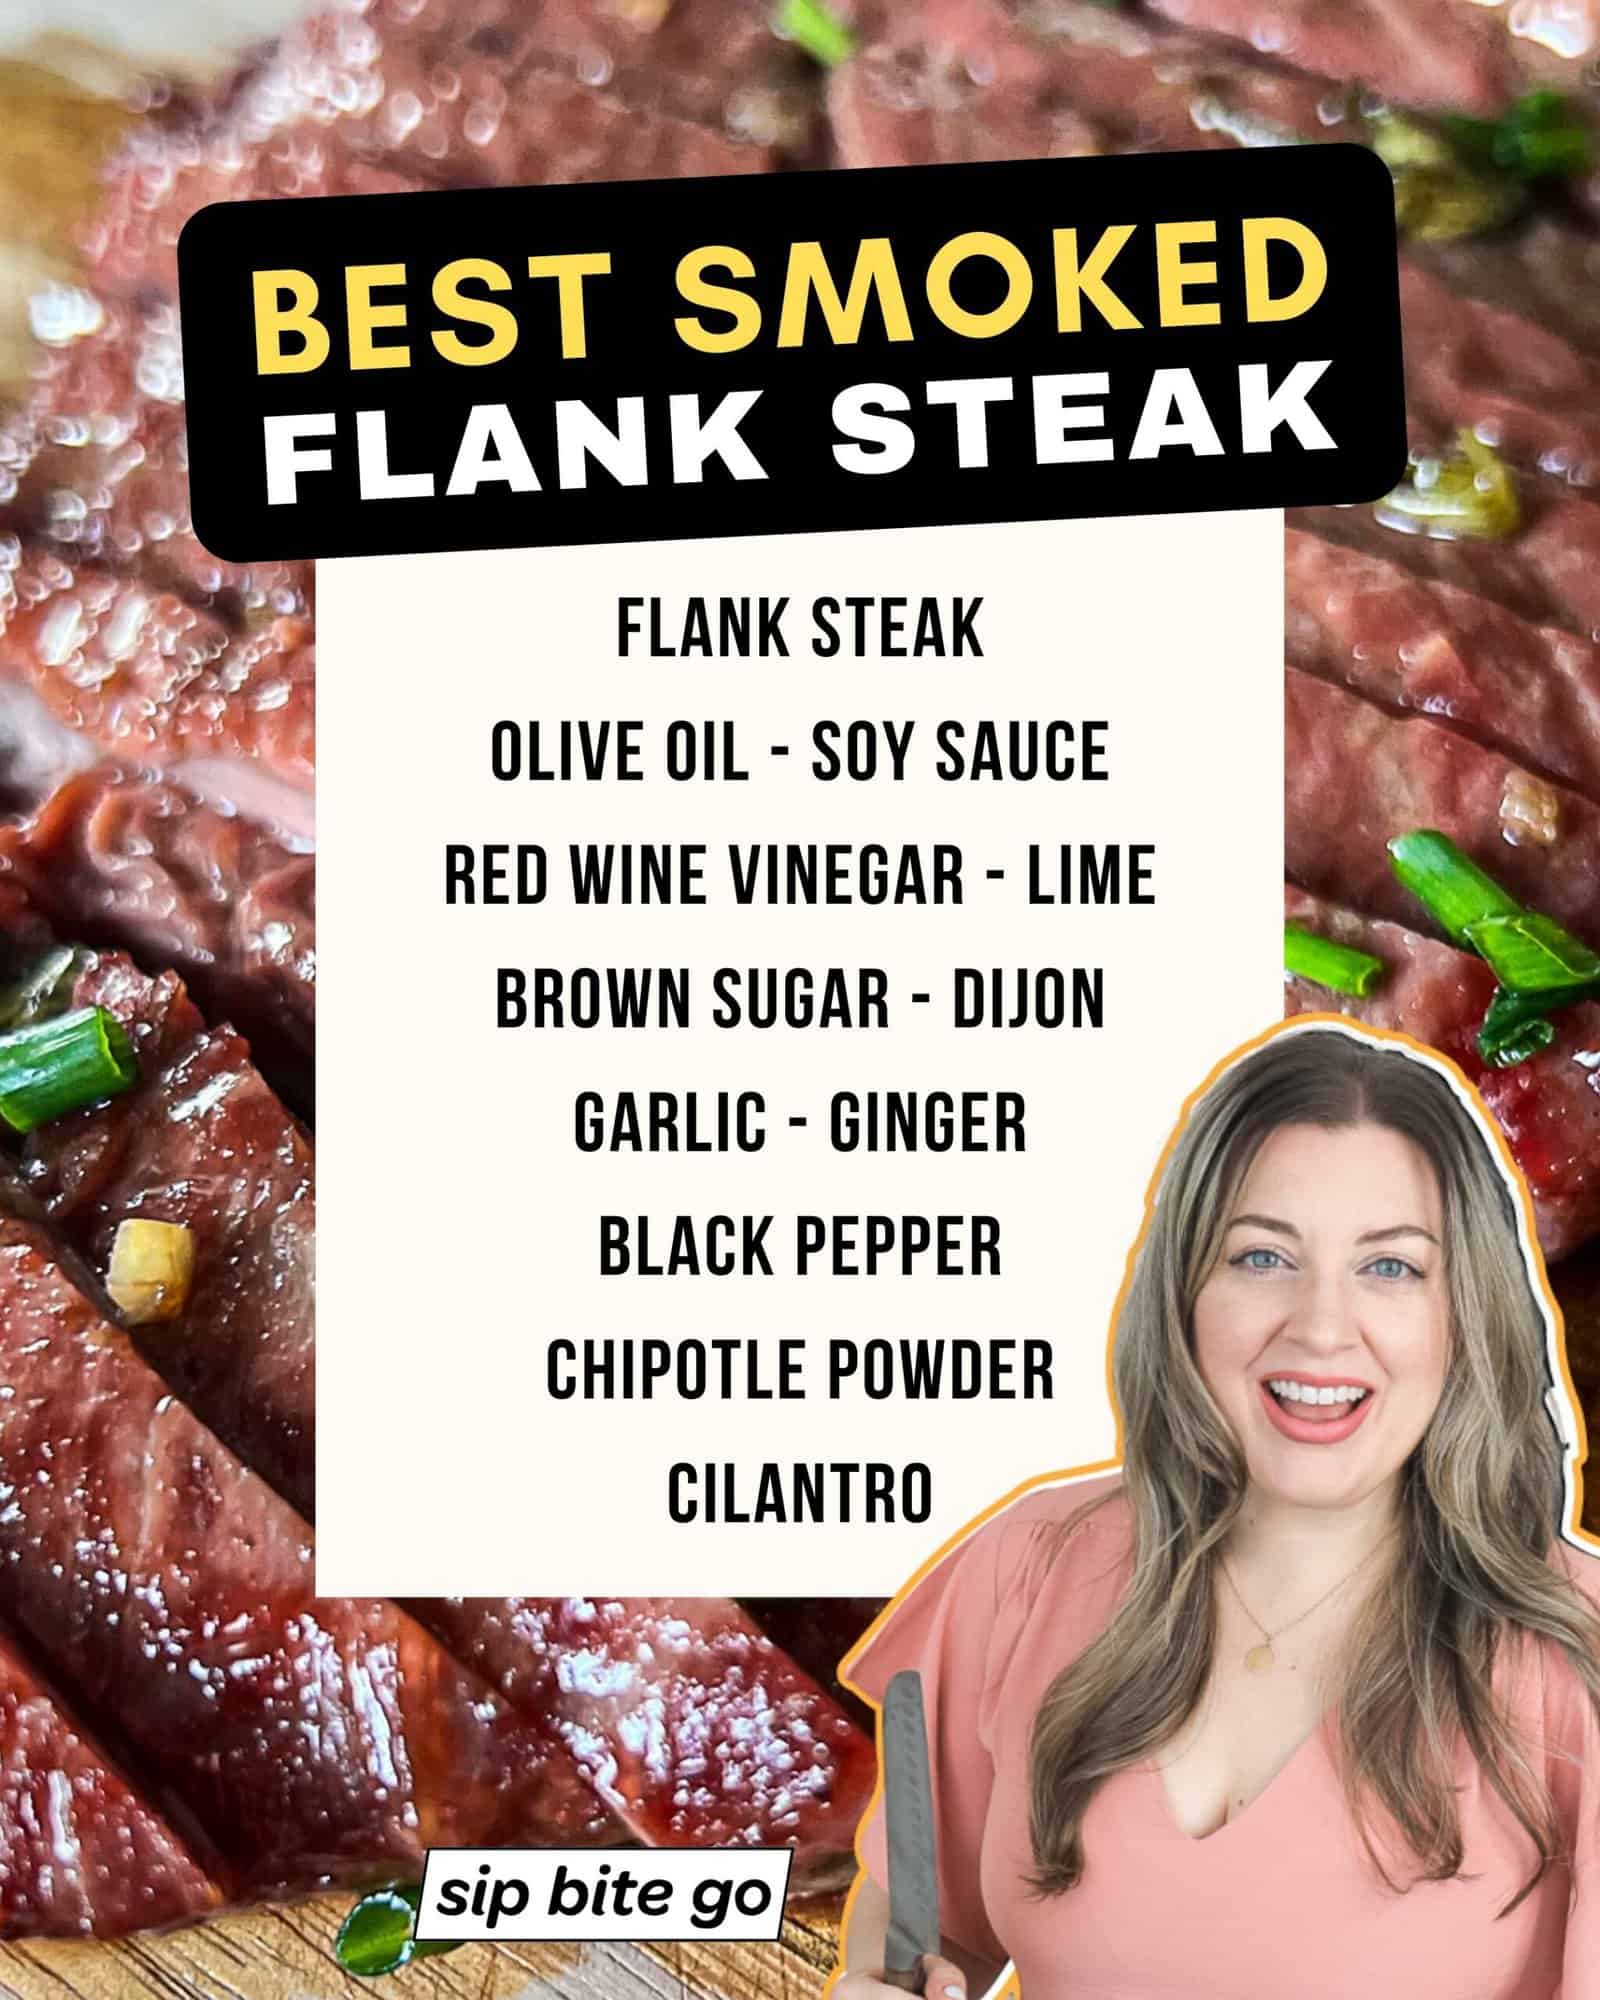 Infographic with list of ingredients to make smoked flank steak on the Traeger pellet gril